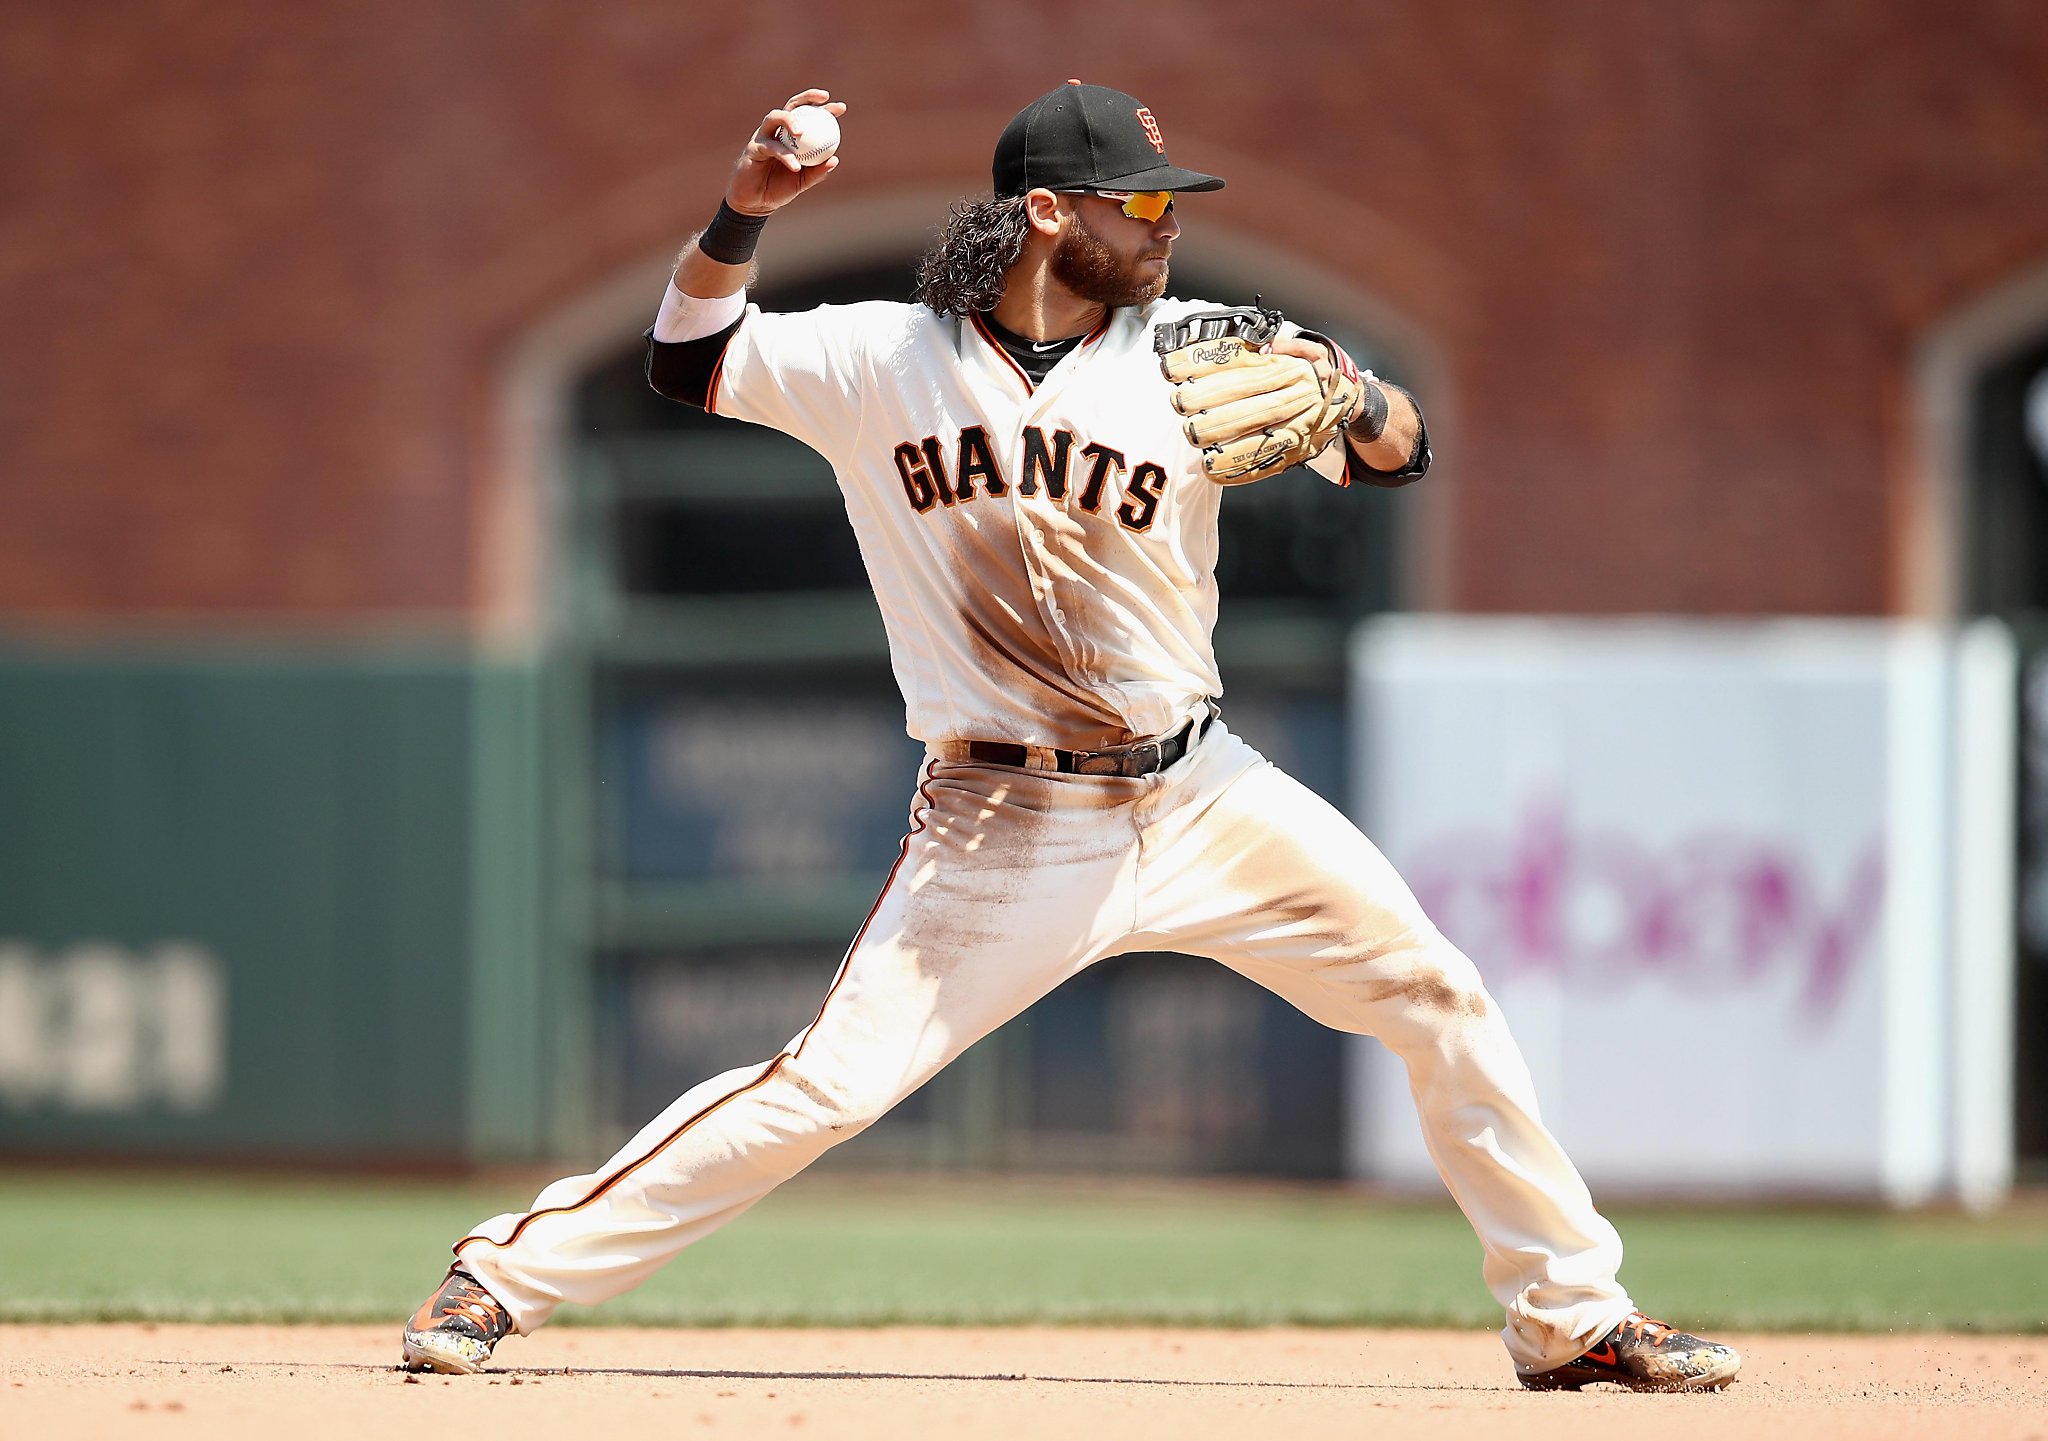 SF Giants' rookie catcher named finalist for Gold Glove, Sports